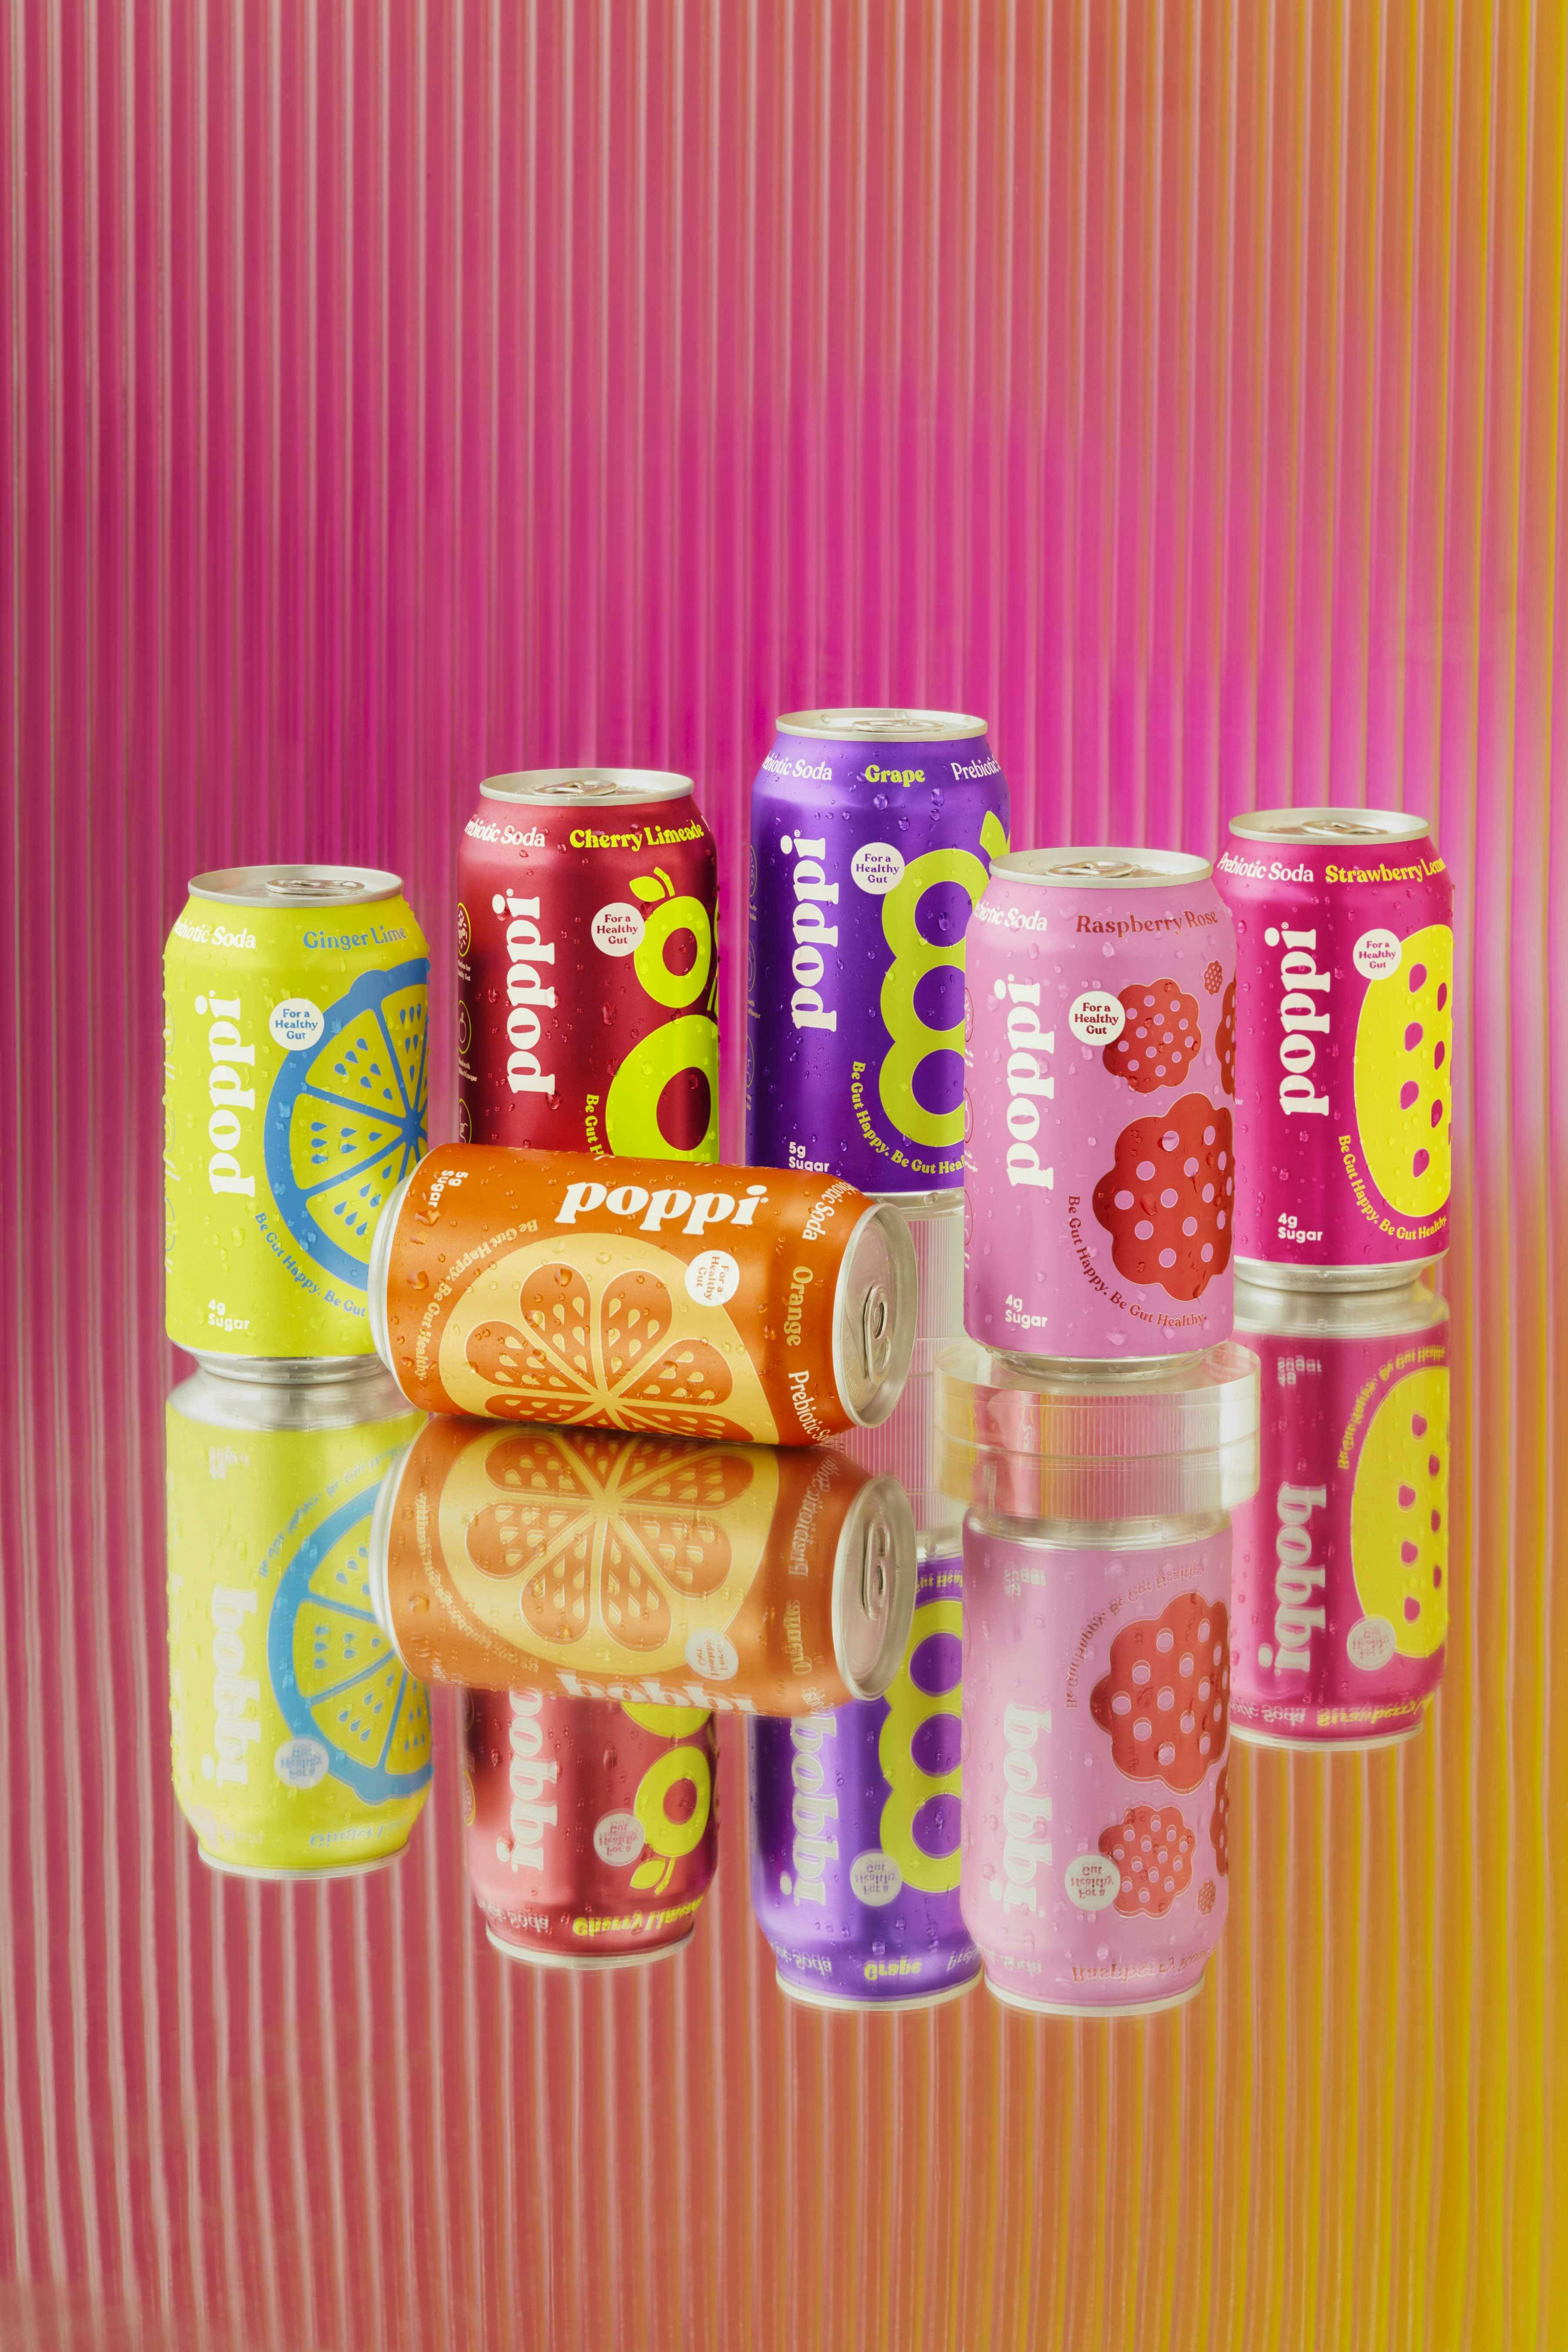 Assorted Poppi products neatly arranged in a group, showcasing a variety of flavors and bottles, ready for a refreshing and healthy beverage experience